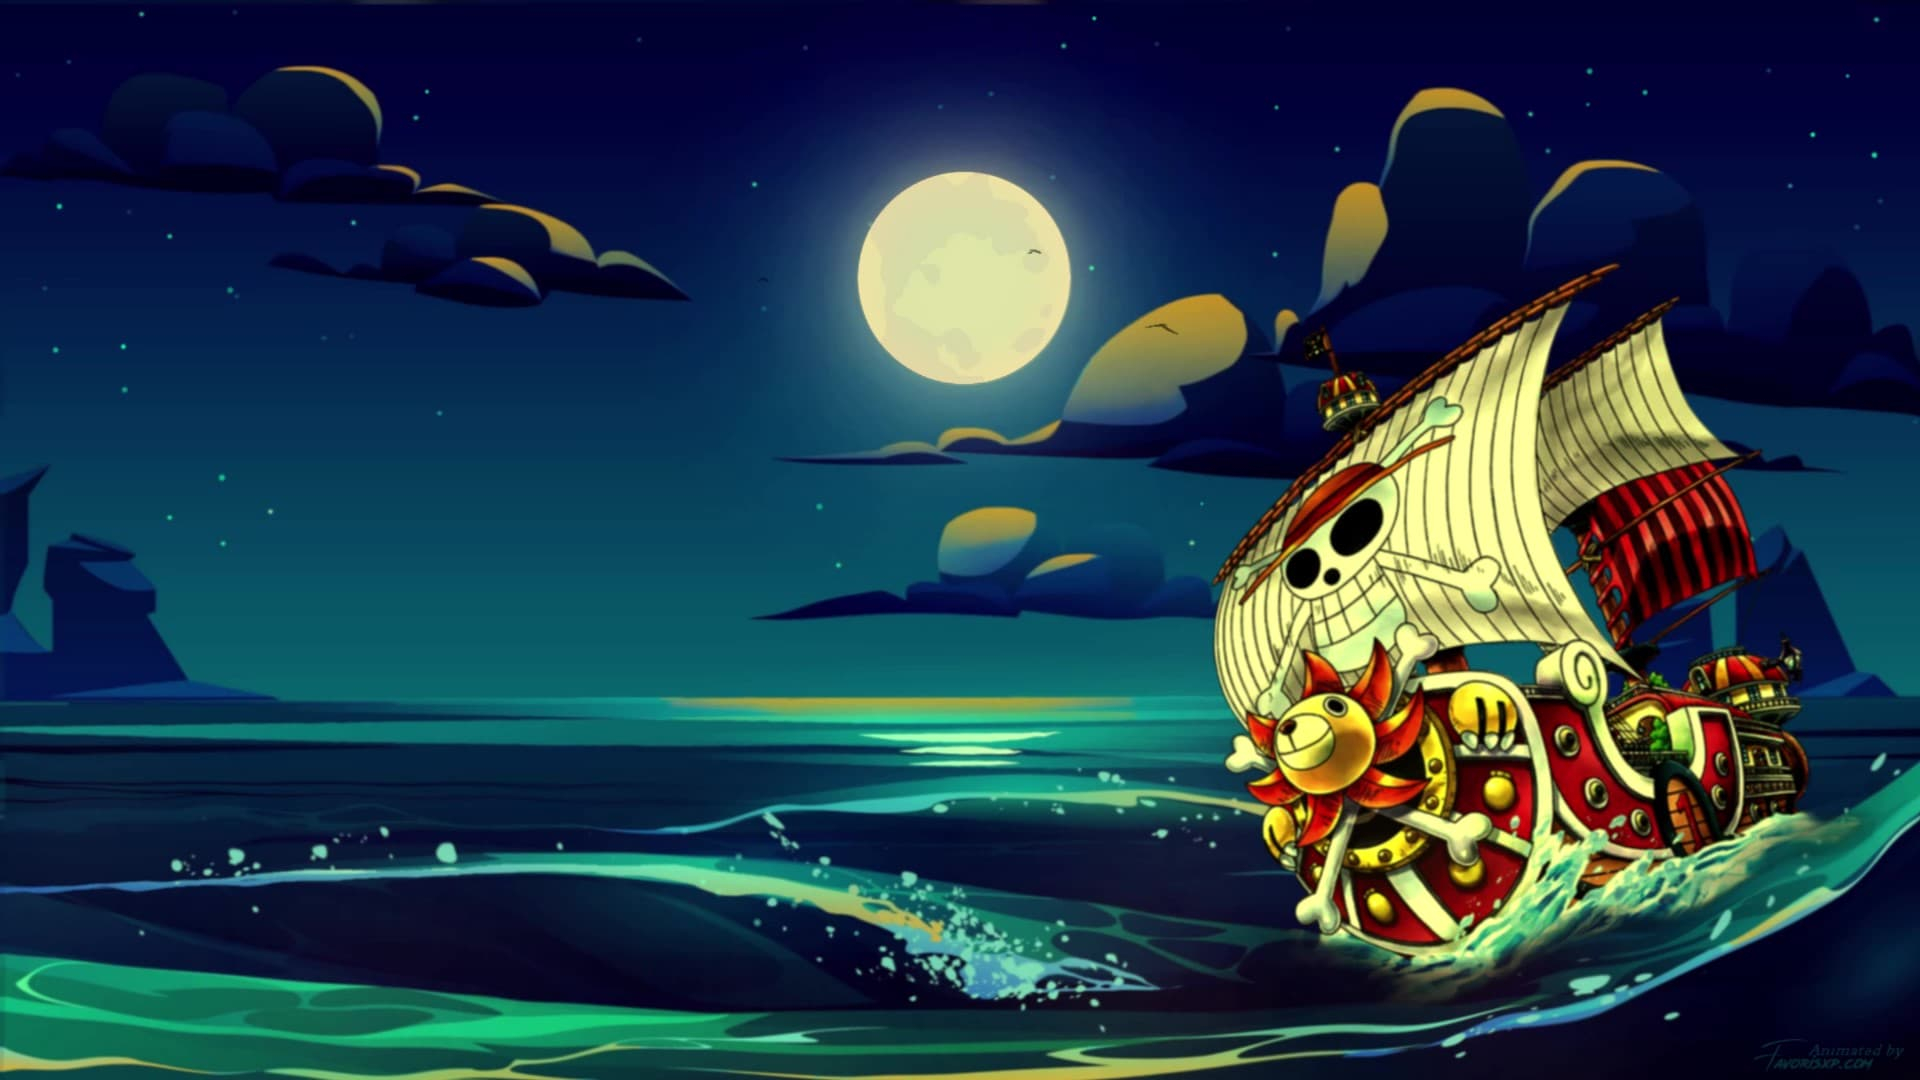 1920x1080 One Piece Live Wallpaper Thousand Sunny by Favorisxp